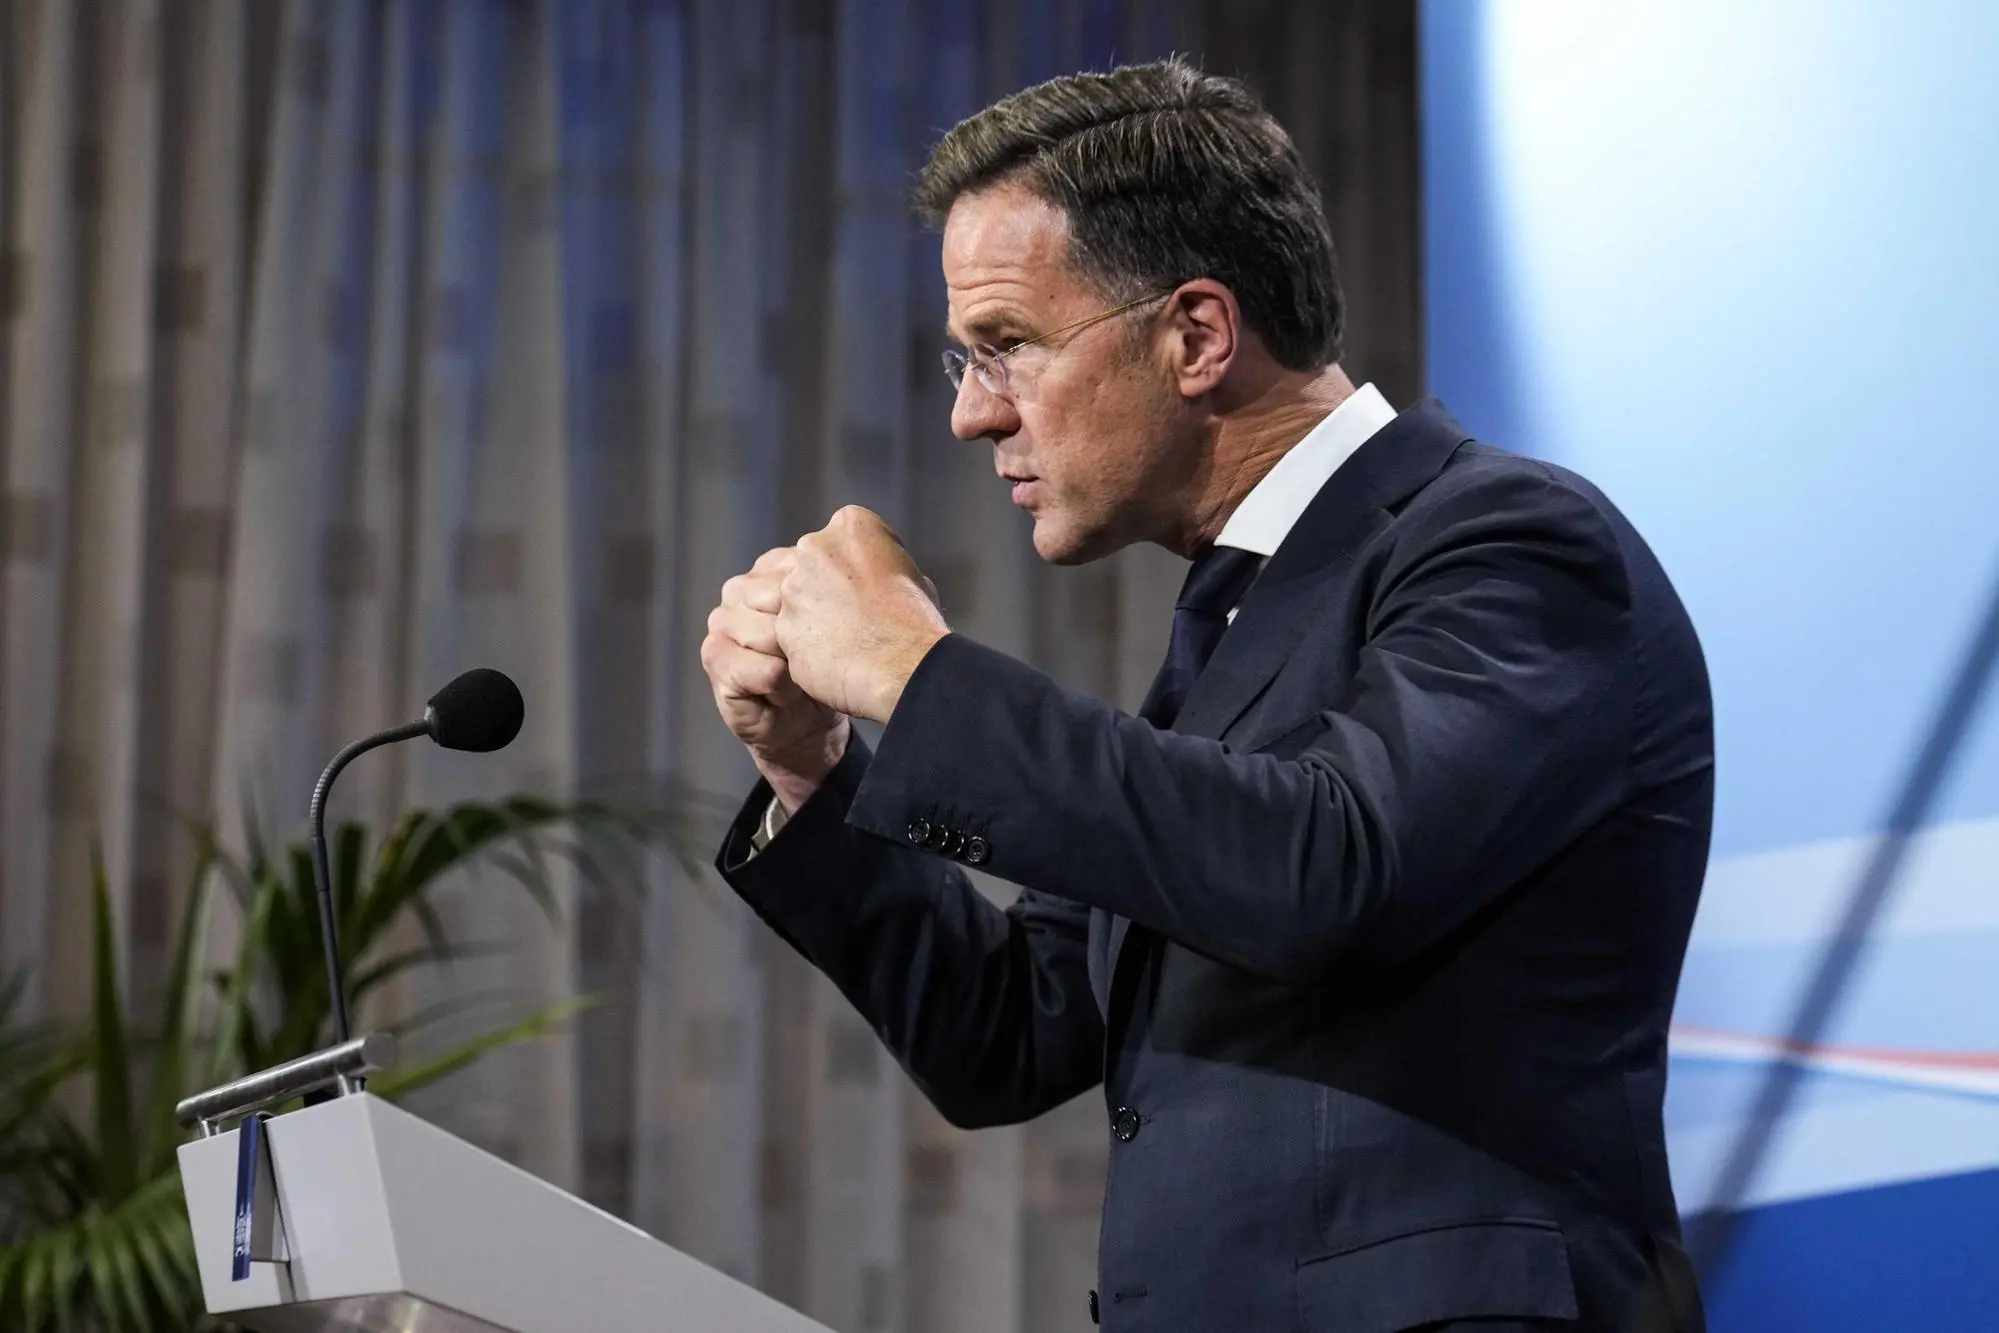 epa10733365 Outgoing Prime Minister Mark Rutte speaks to the press after an extra cabinet meeting in the Hague, Netherlands, 07 July 2023. Rutte announced his resignation citing irreconcilable differences within his four-party coalition about how to rein in migration. EPA/Robin Utrecht